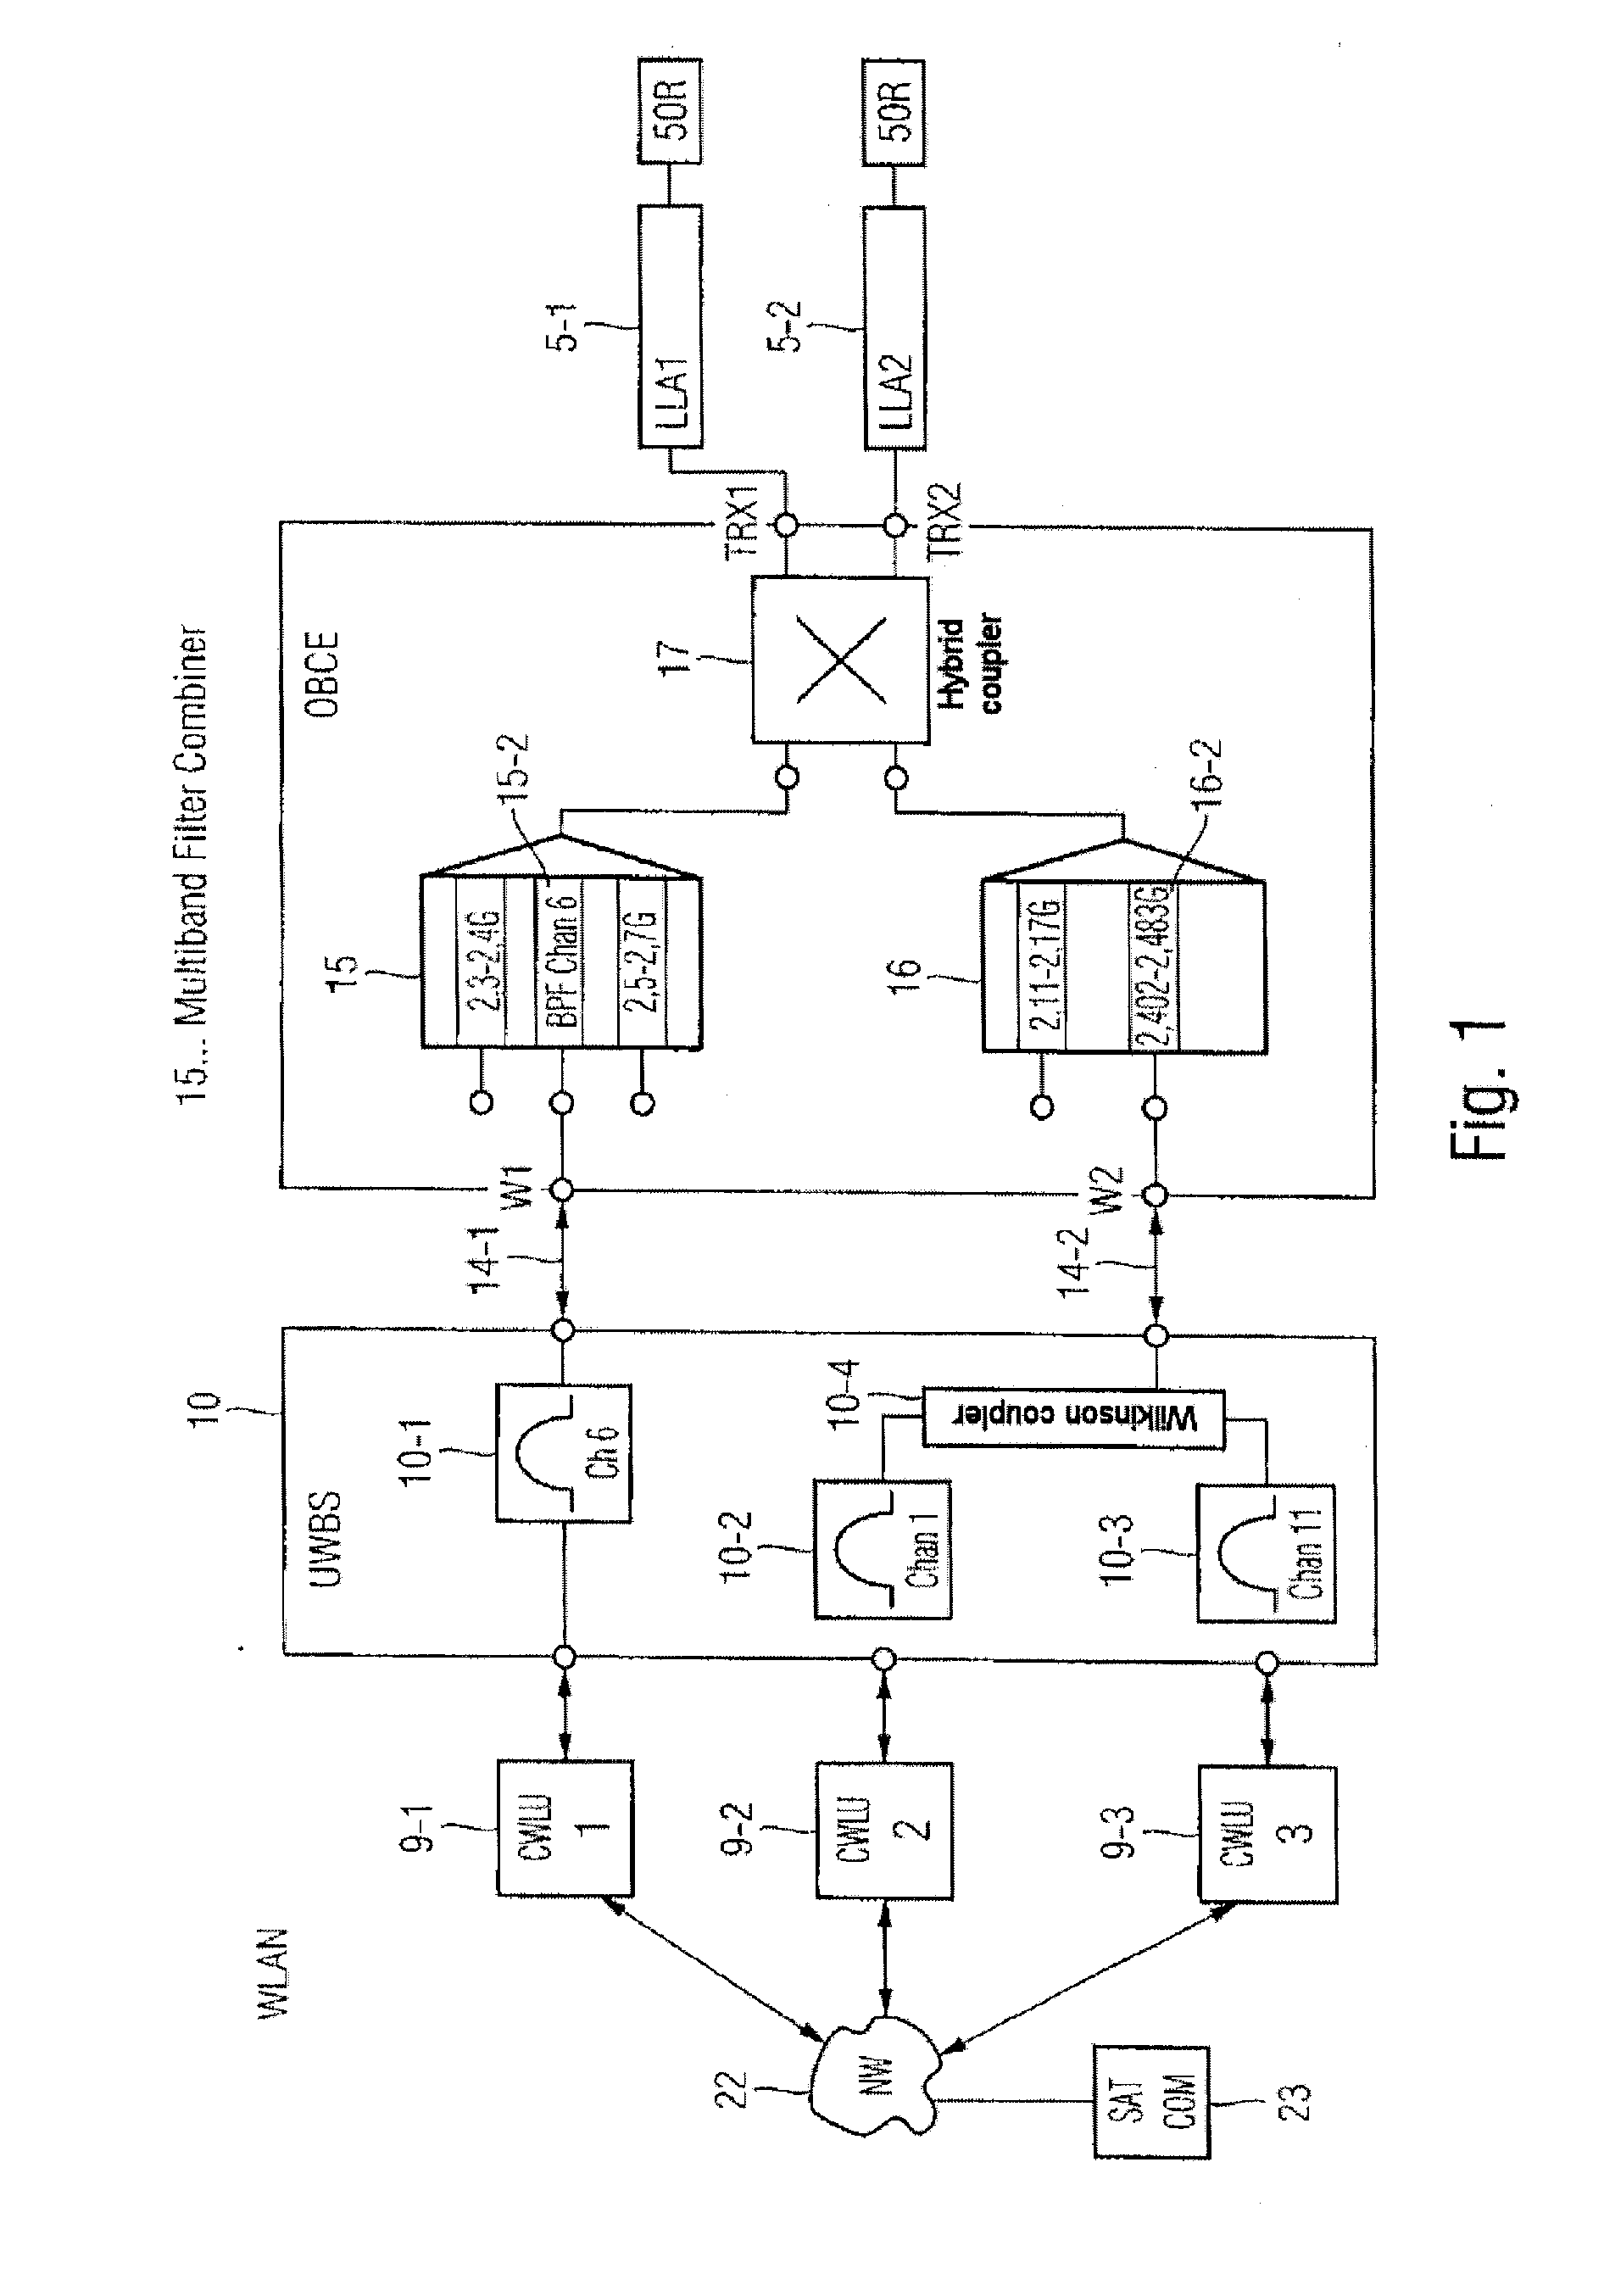 Device for providing radiofrequency signal connections